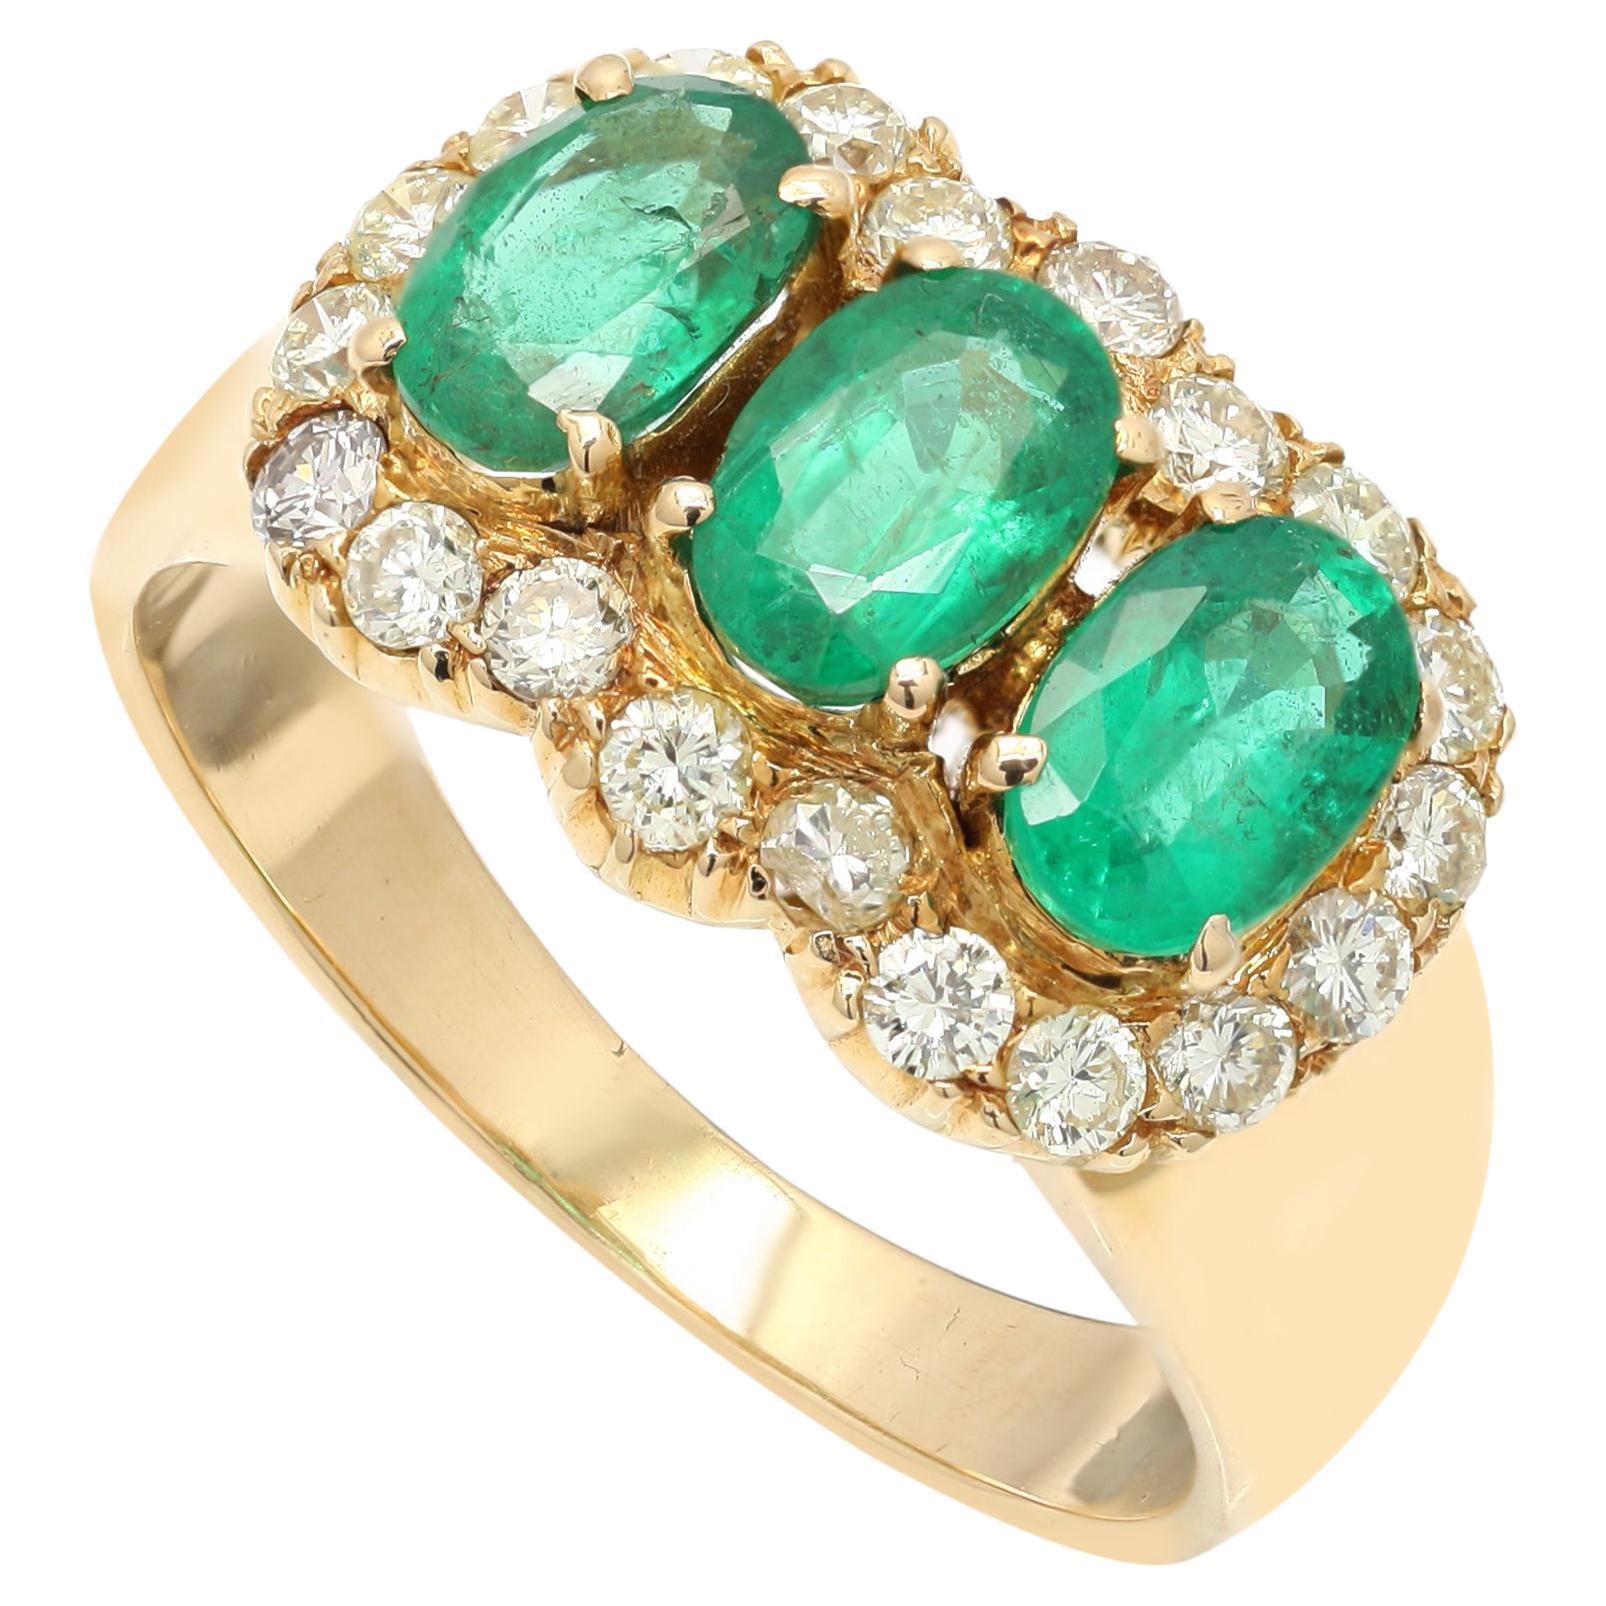 Estate 2.1 ct Oval Emerald Ring with Diamonds Encircling in 18 Karat Yellow Gold